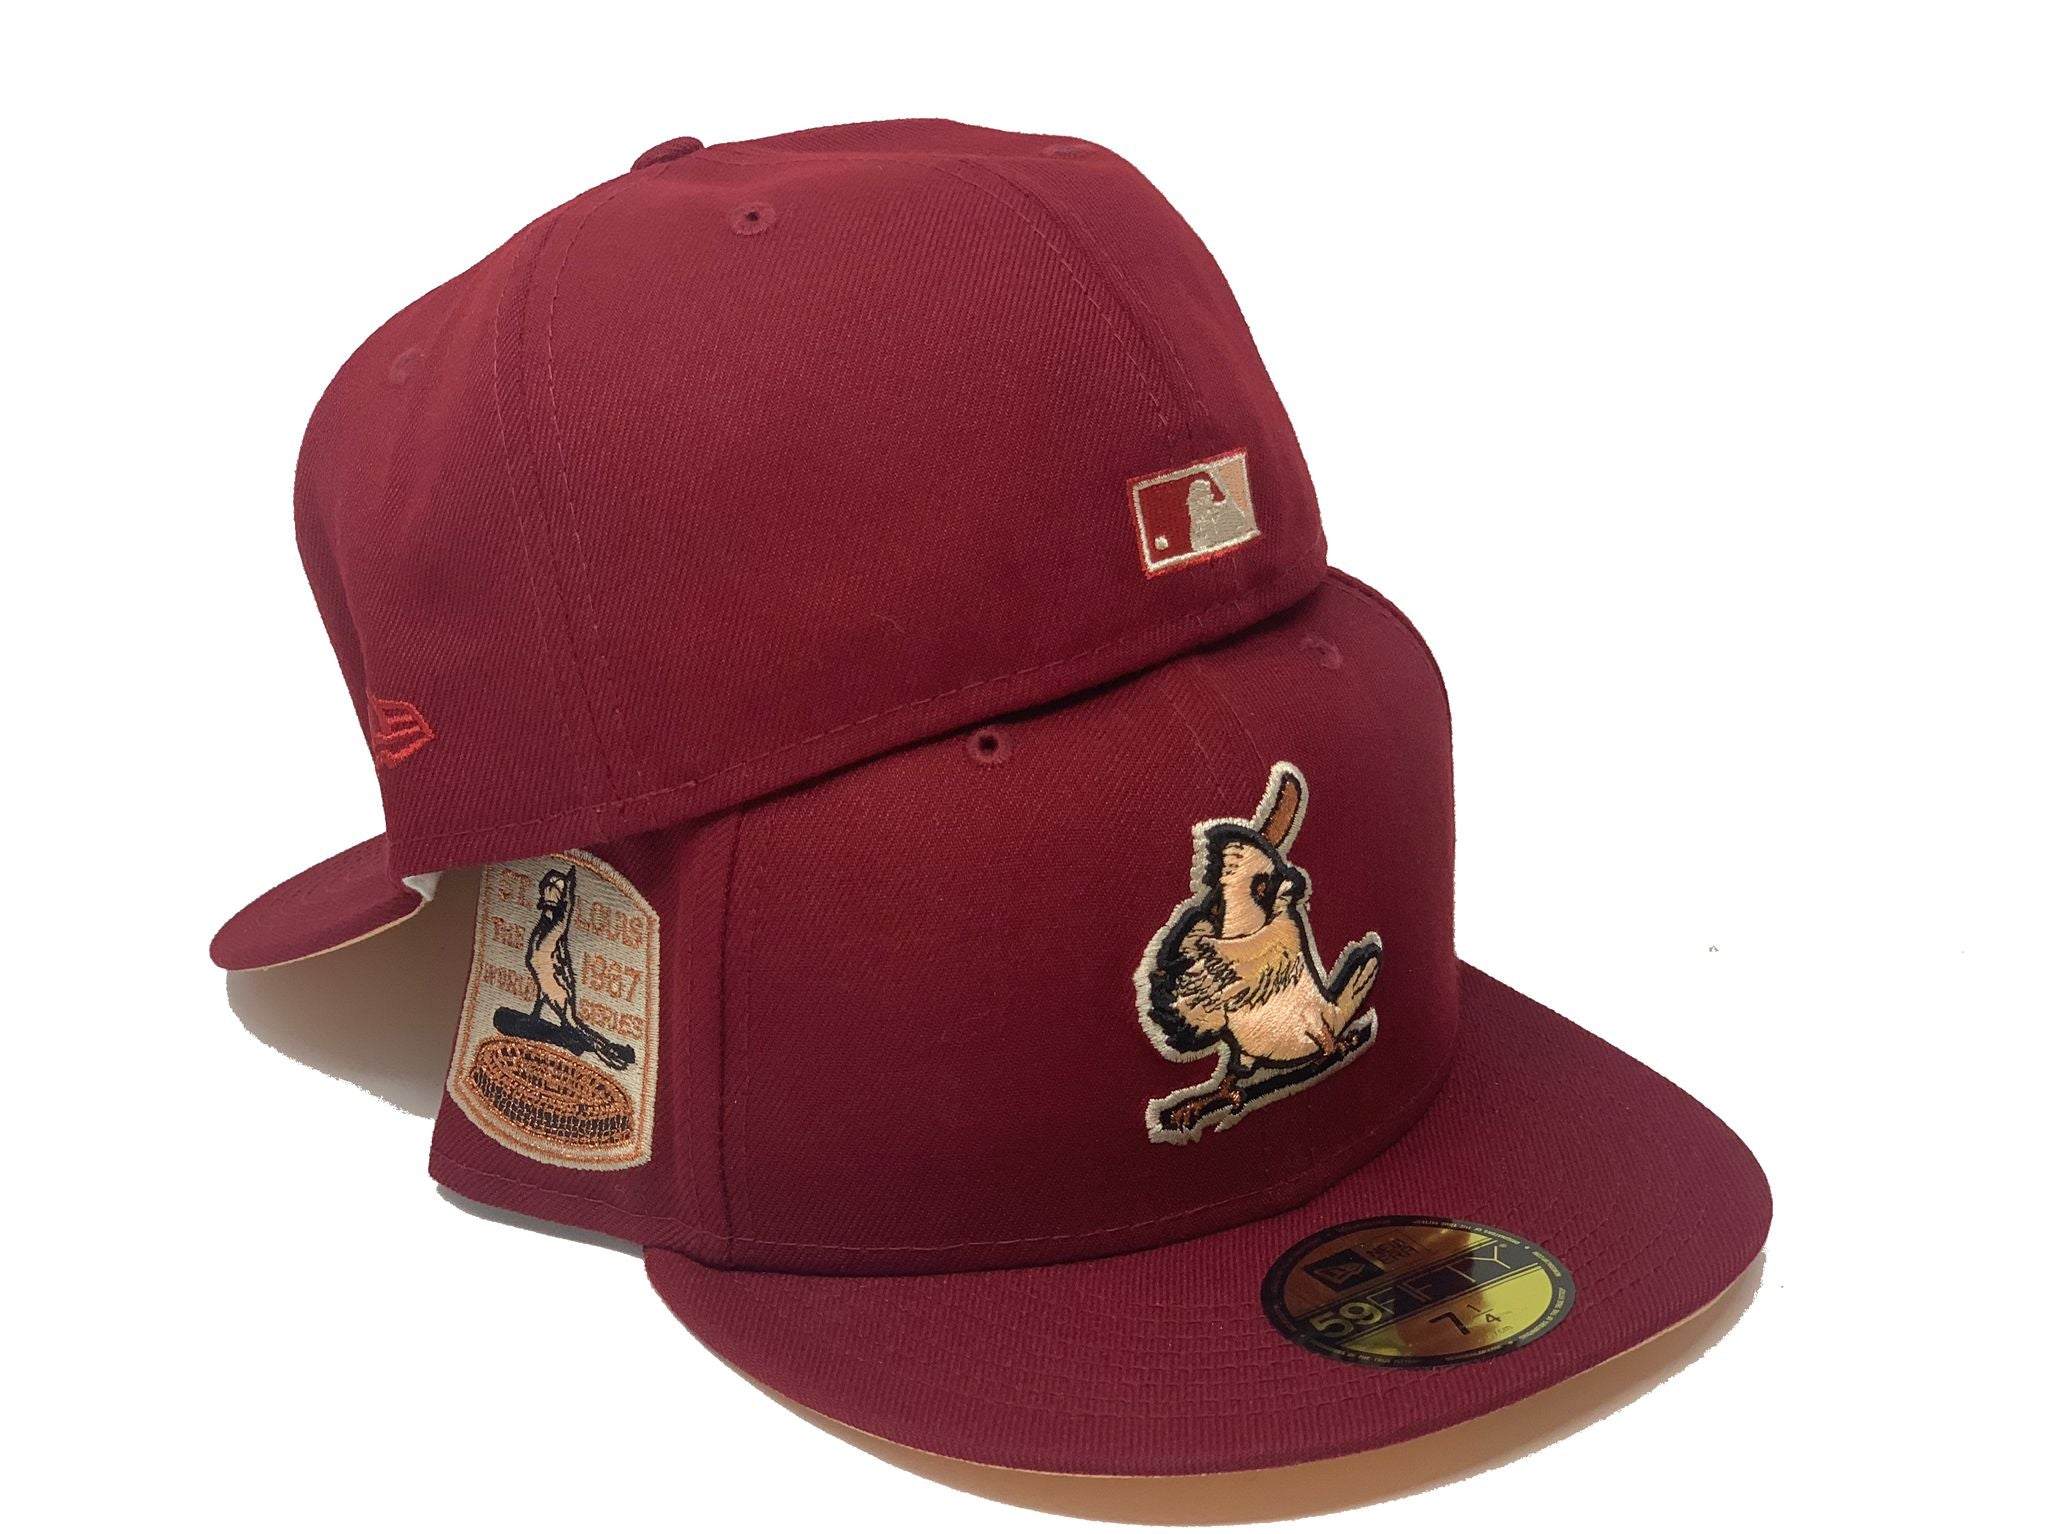 Arizona Cardinals THROWBACK TIMEOUT Burgundy Fitted Hat